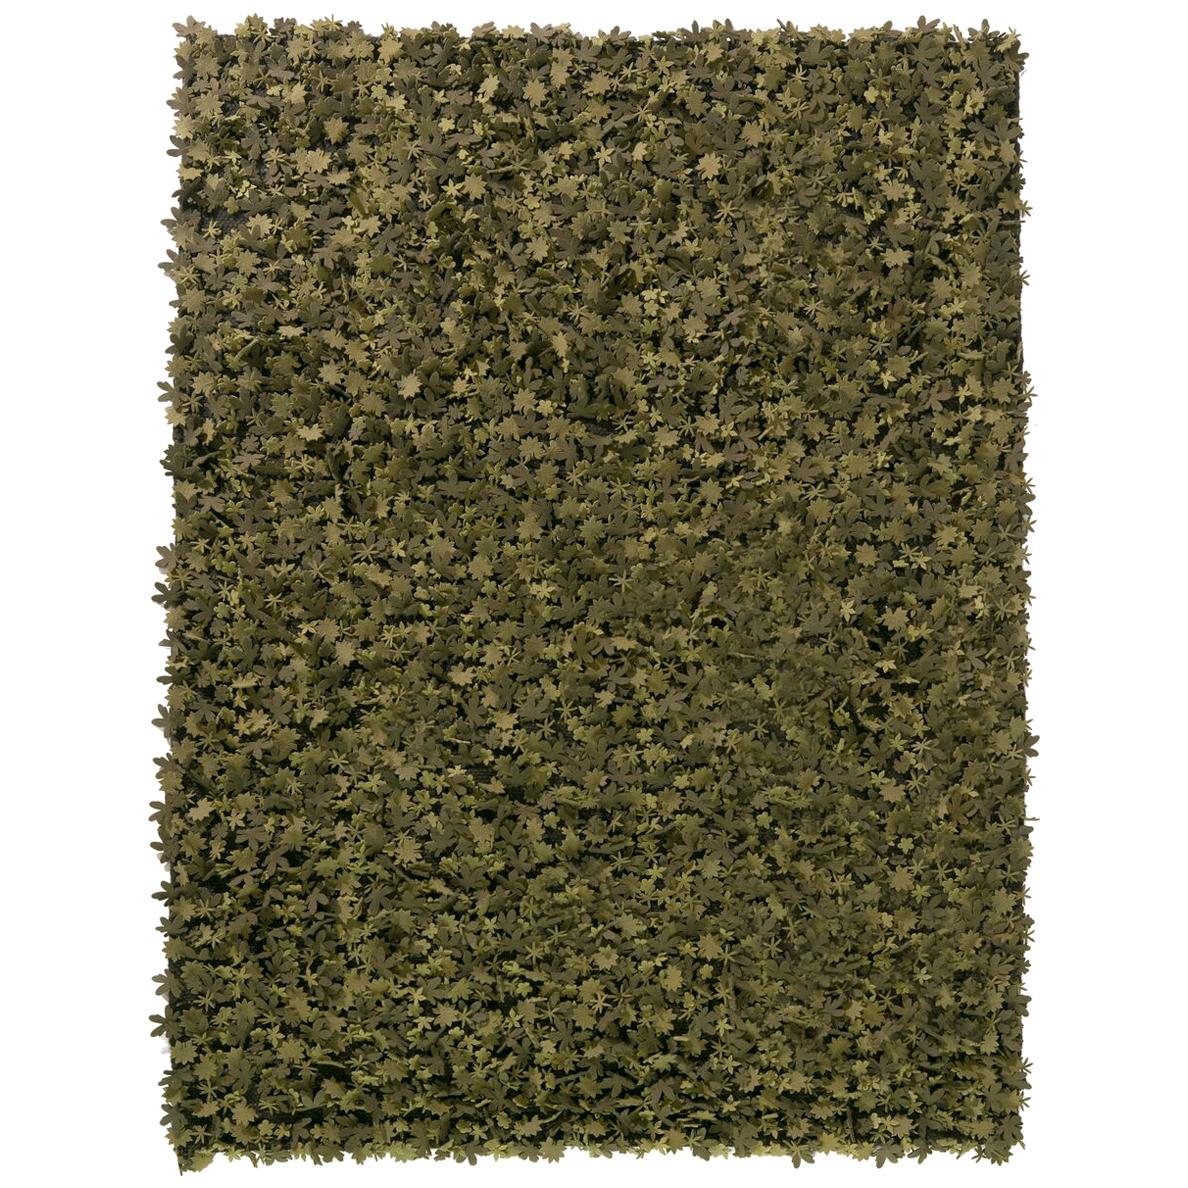 Field of Flowers Hand-Loomed Green Wool Felt Rug by Studio Tord Boontje, Medium For Sale